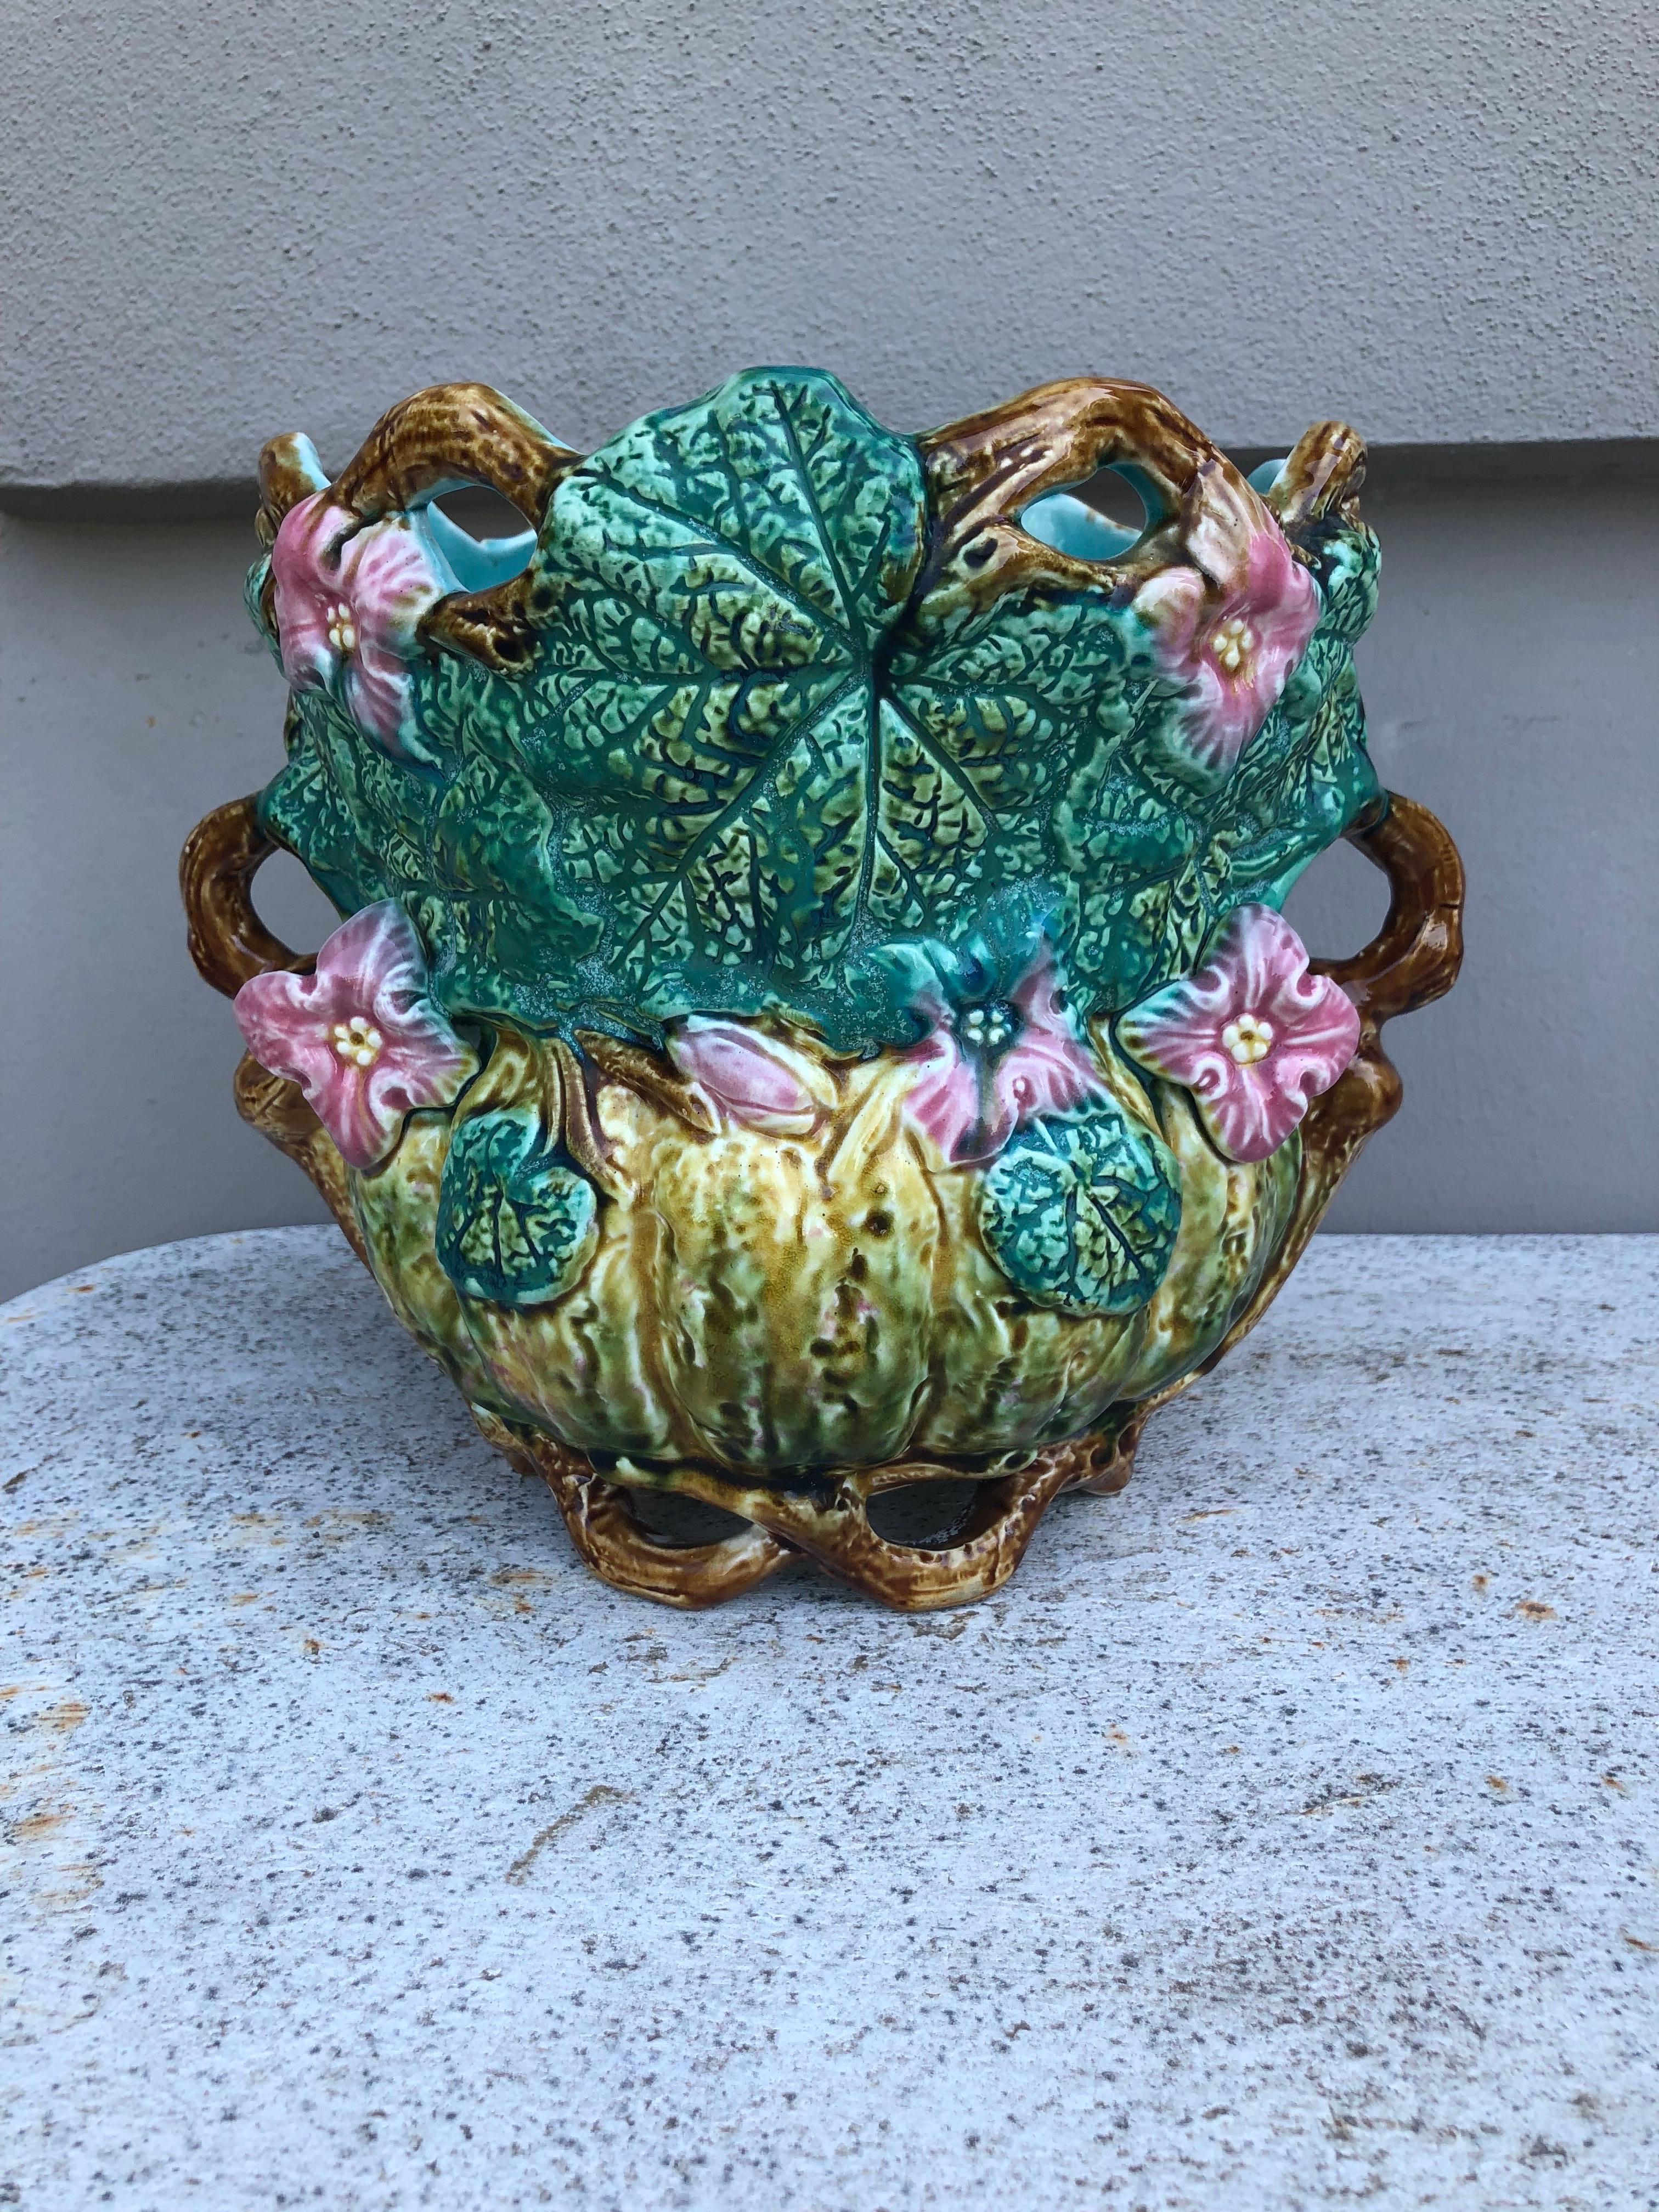 Majolica pumpkin jardiniere signed Onnaing, circa 1890, a reticulated planter with pumpkin flowers signed Onnaing 407.